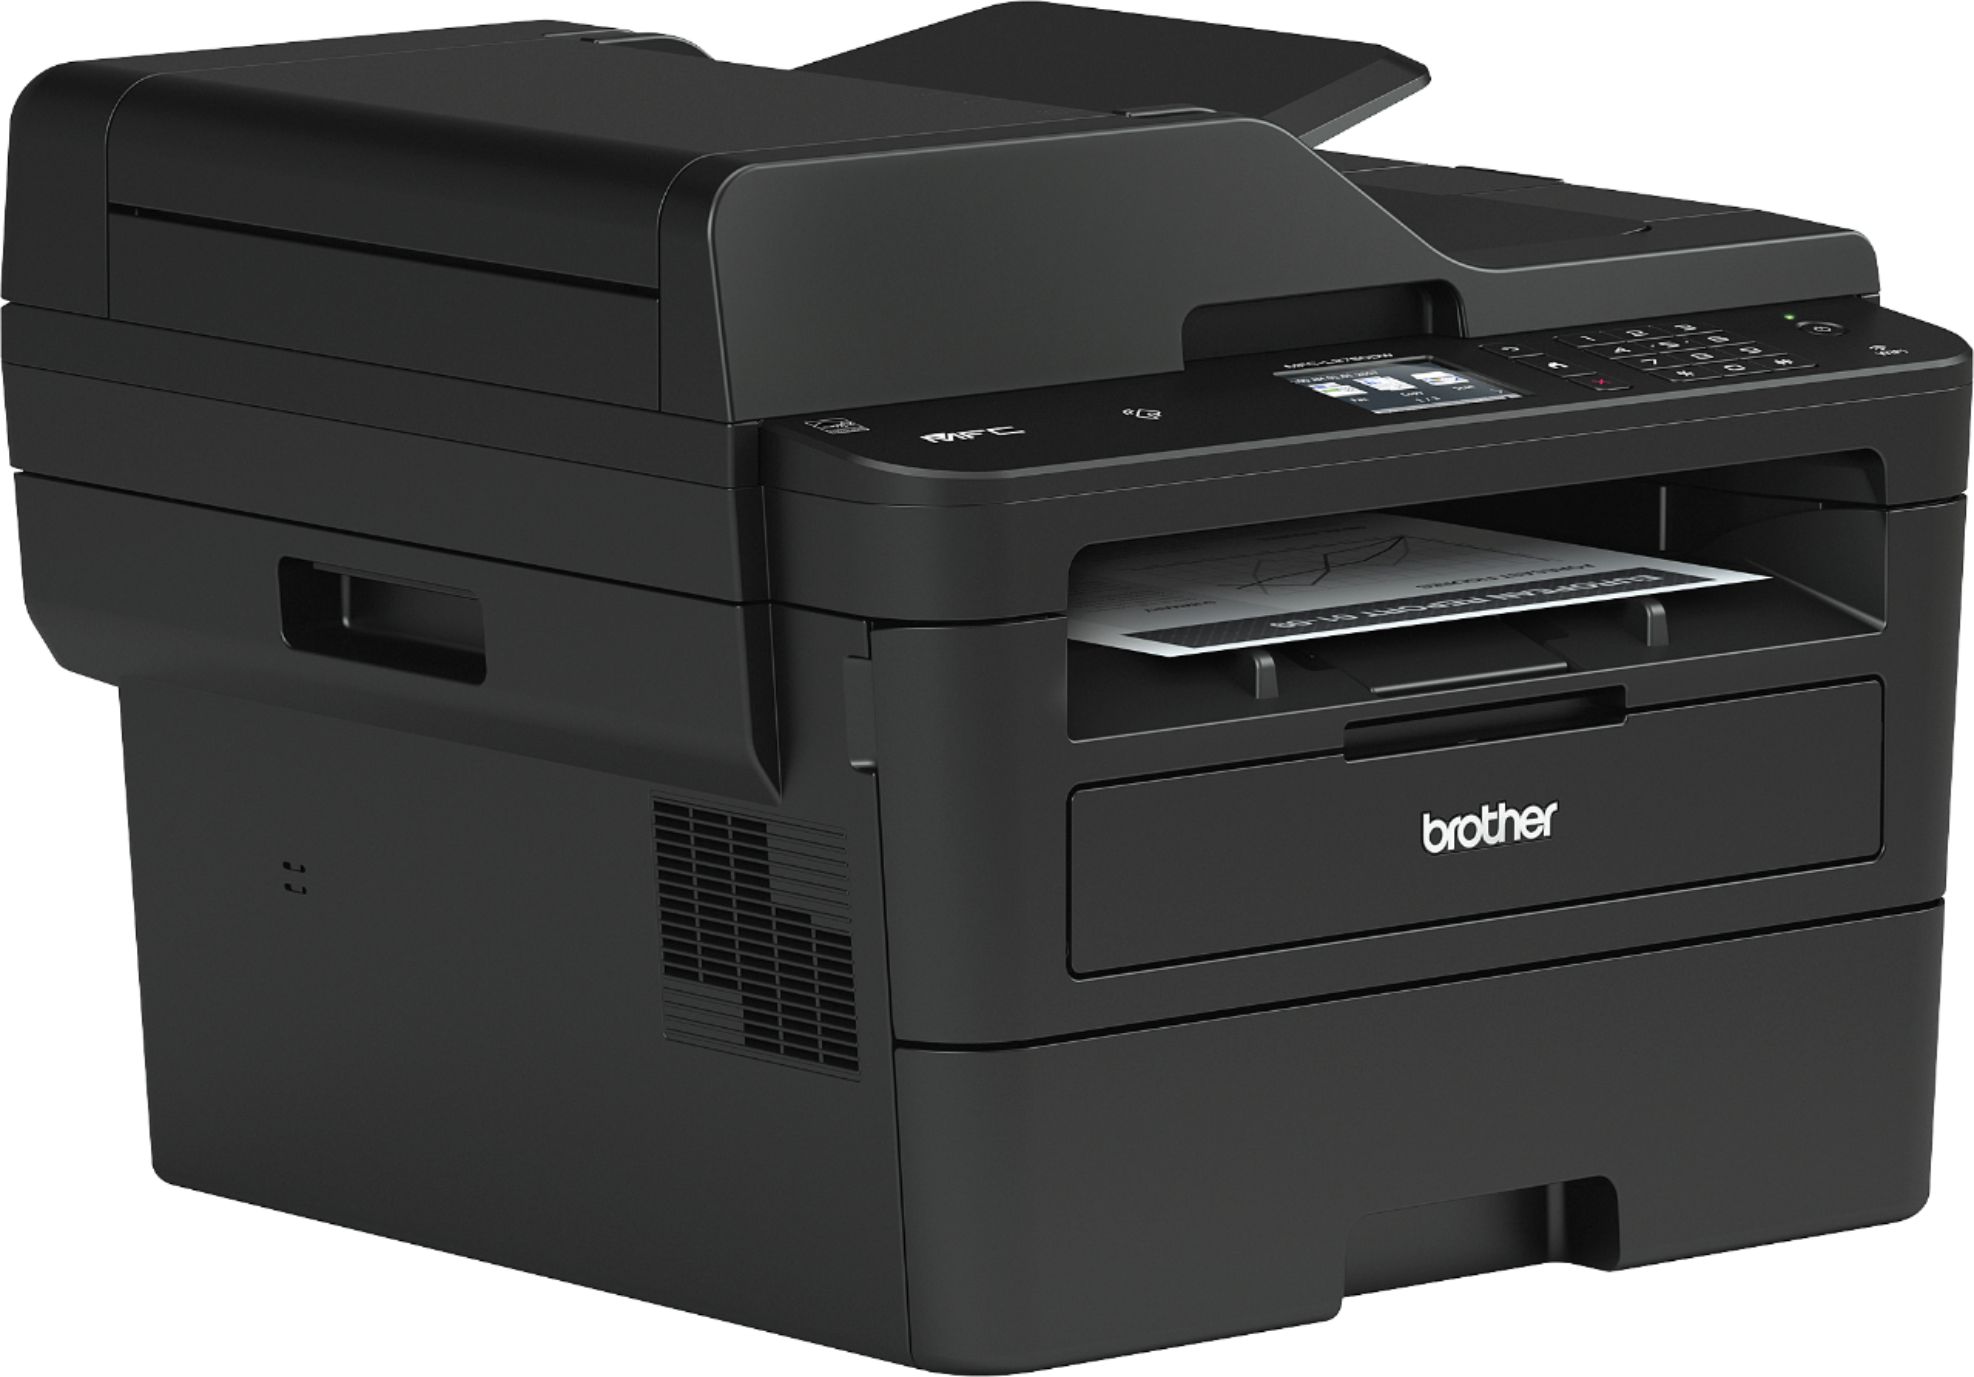 Angle View: Brother - MFC-L2750DW Wireless Black-and-White All-In-One Refresh Subscription Eligible Laser Printer - Gray